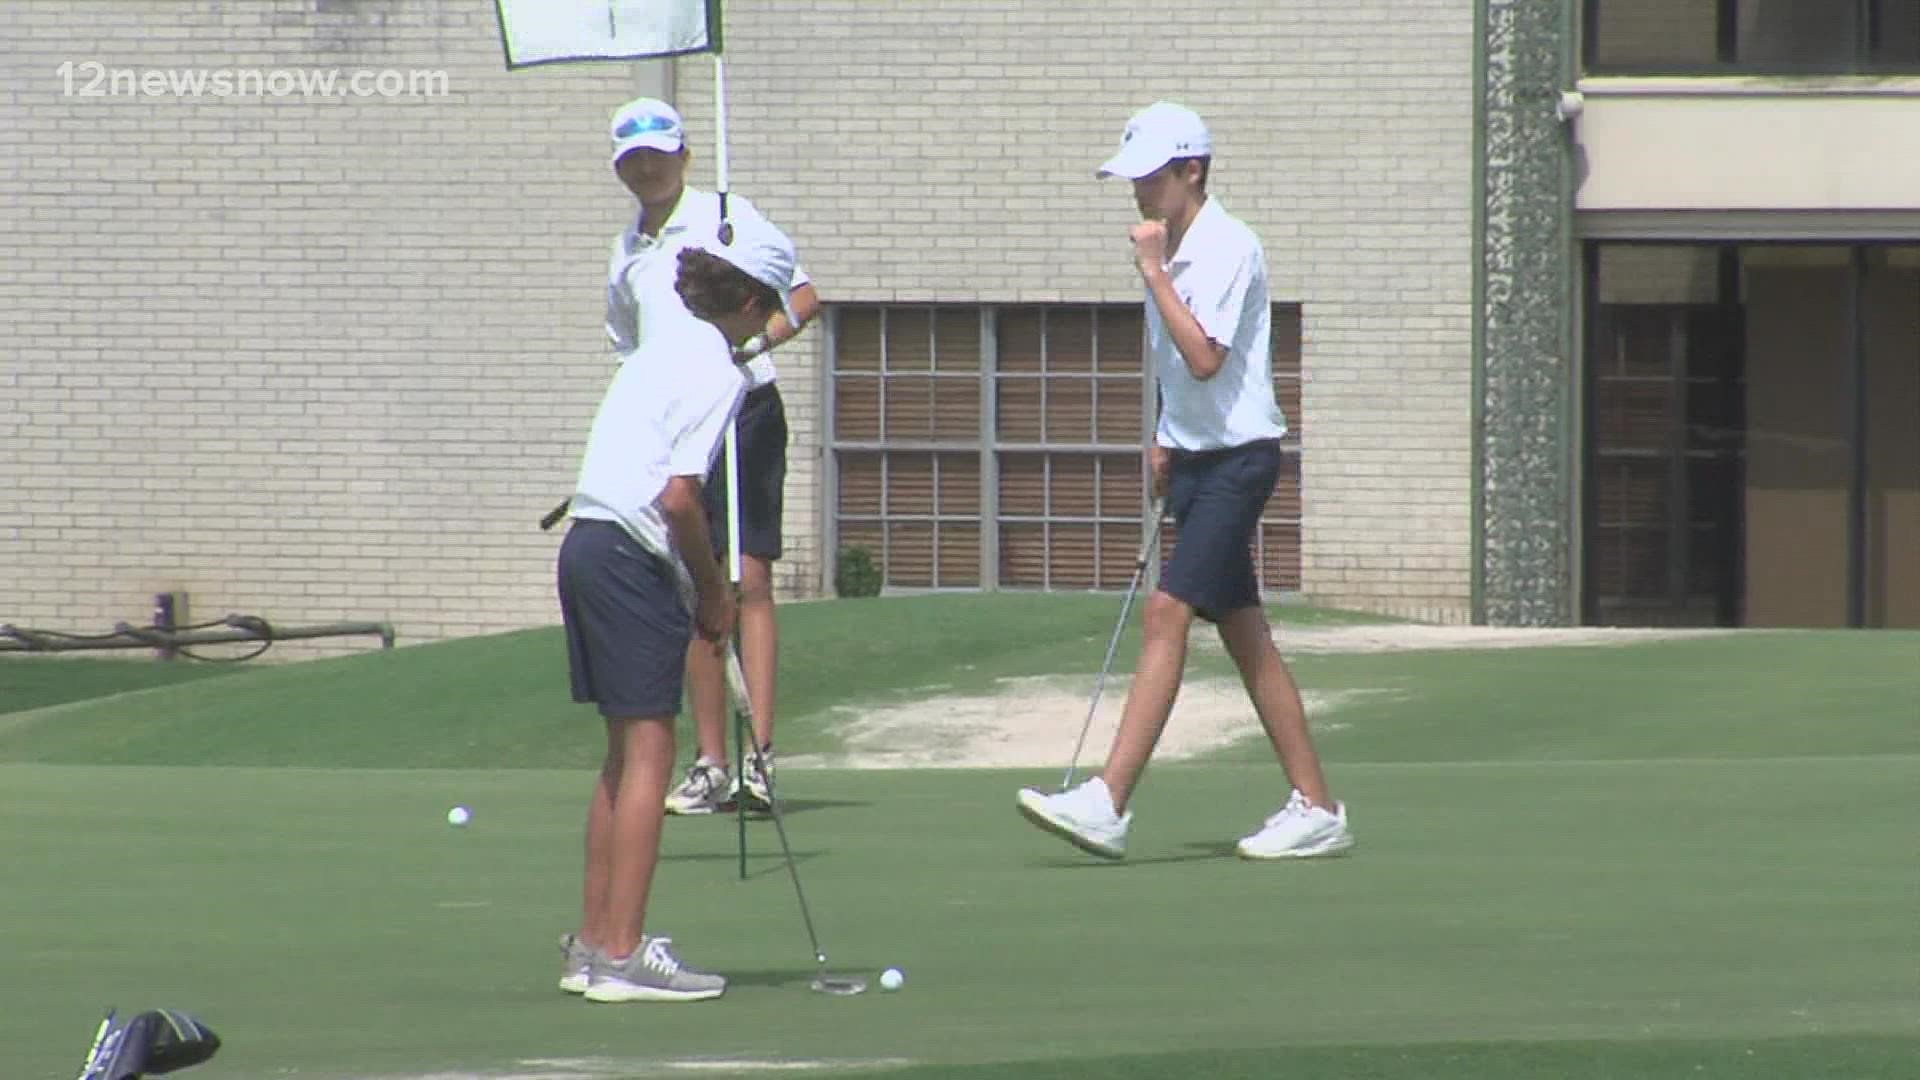 Middle school golfers finish up their season at the Beaumont Country Club